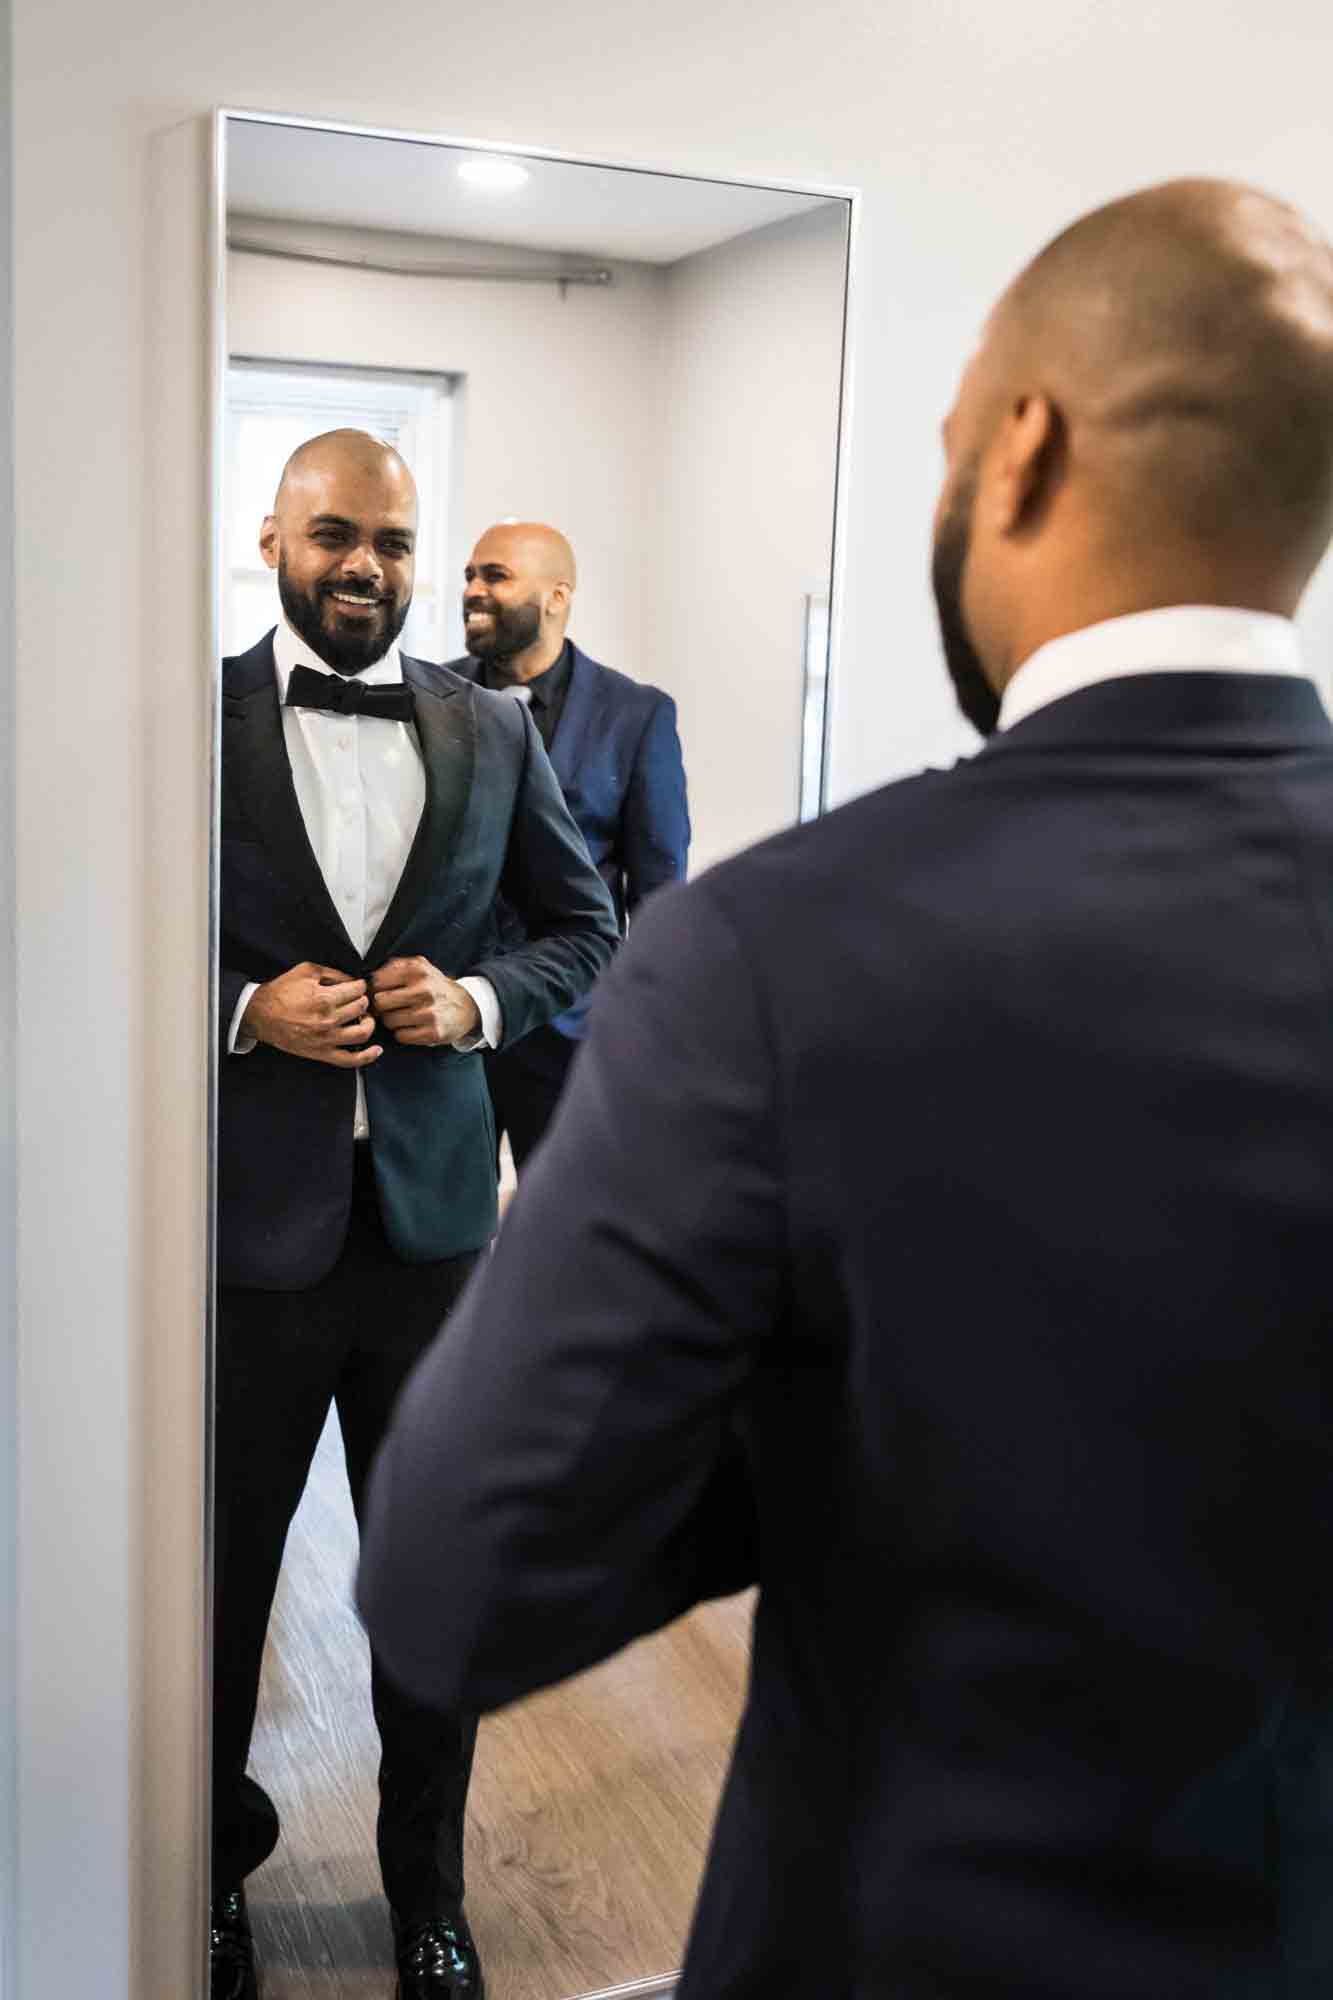 Groom adjusting tux jacket in mirror with man in background at a Sanctuary Roosevelt Island wedding